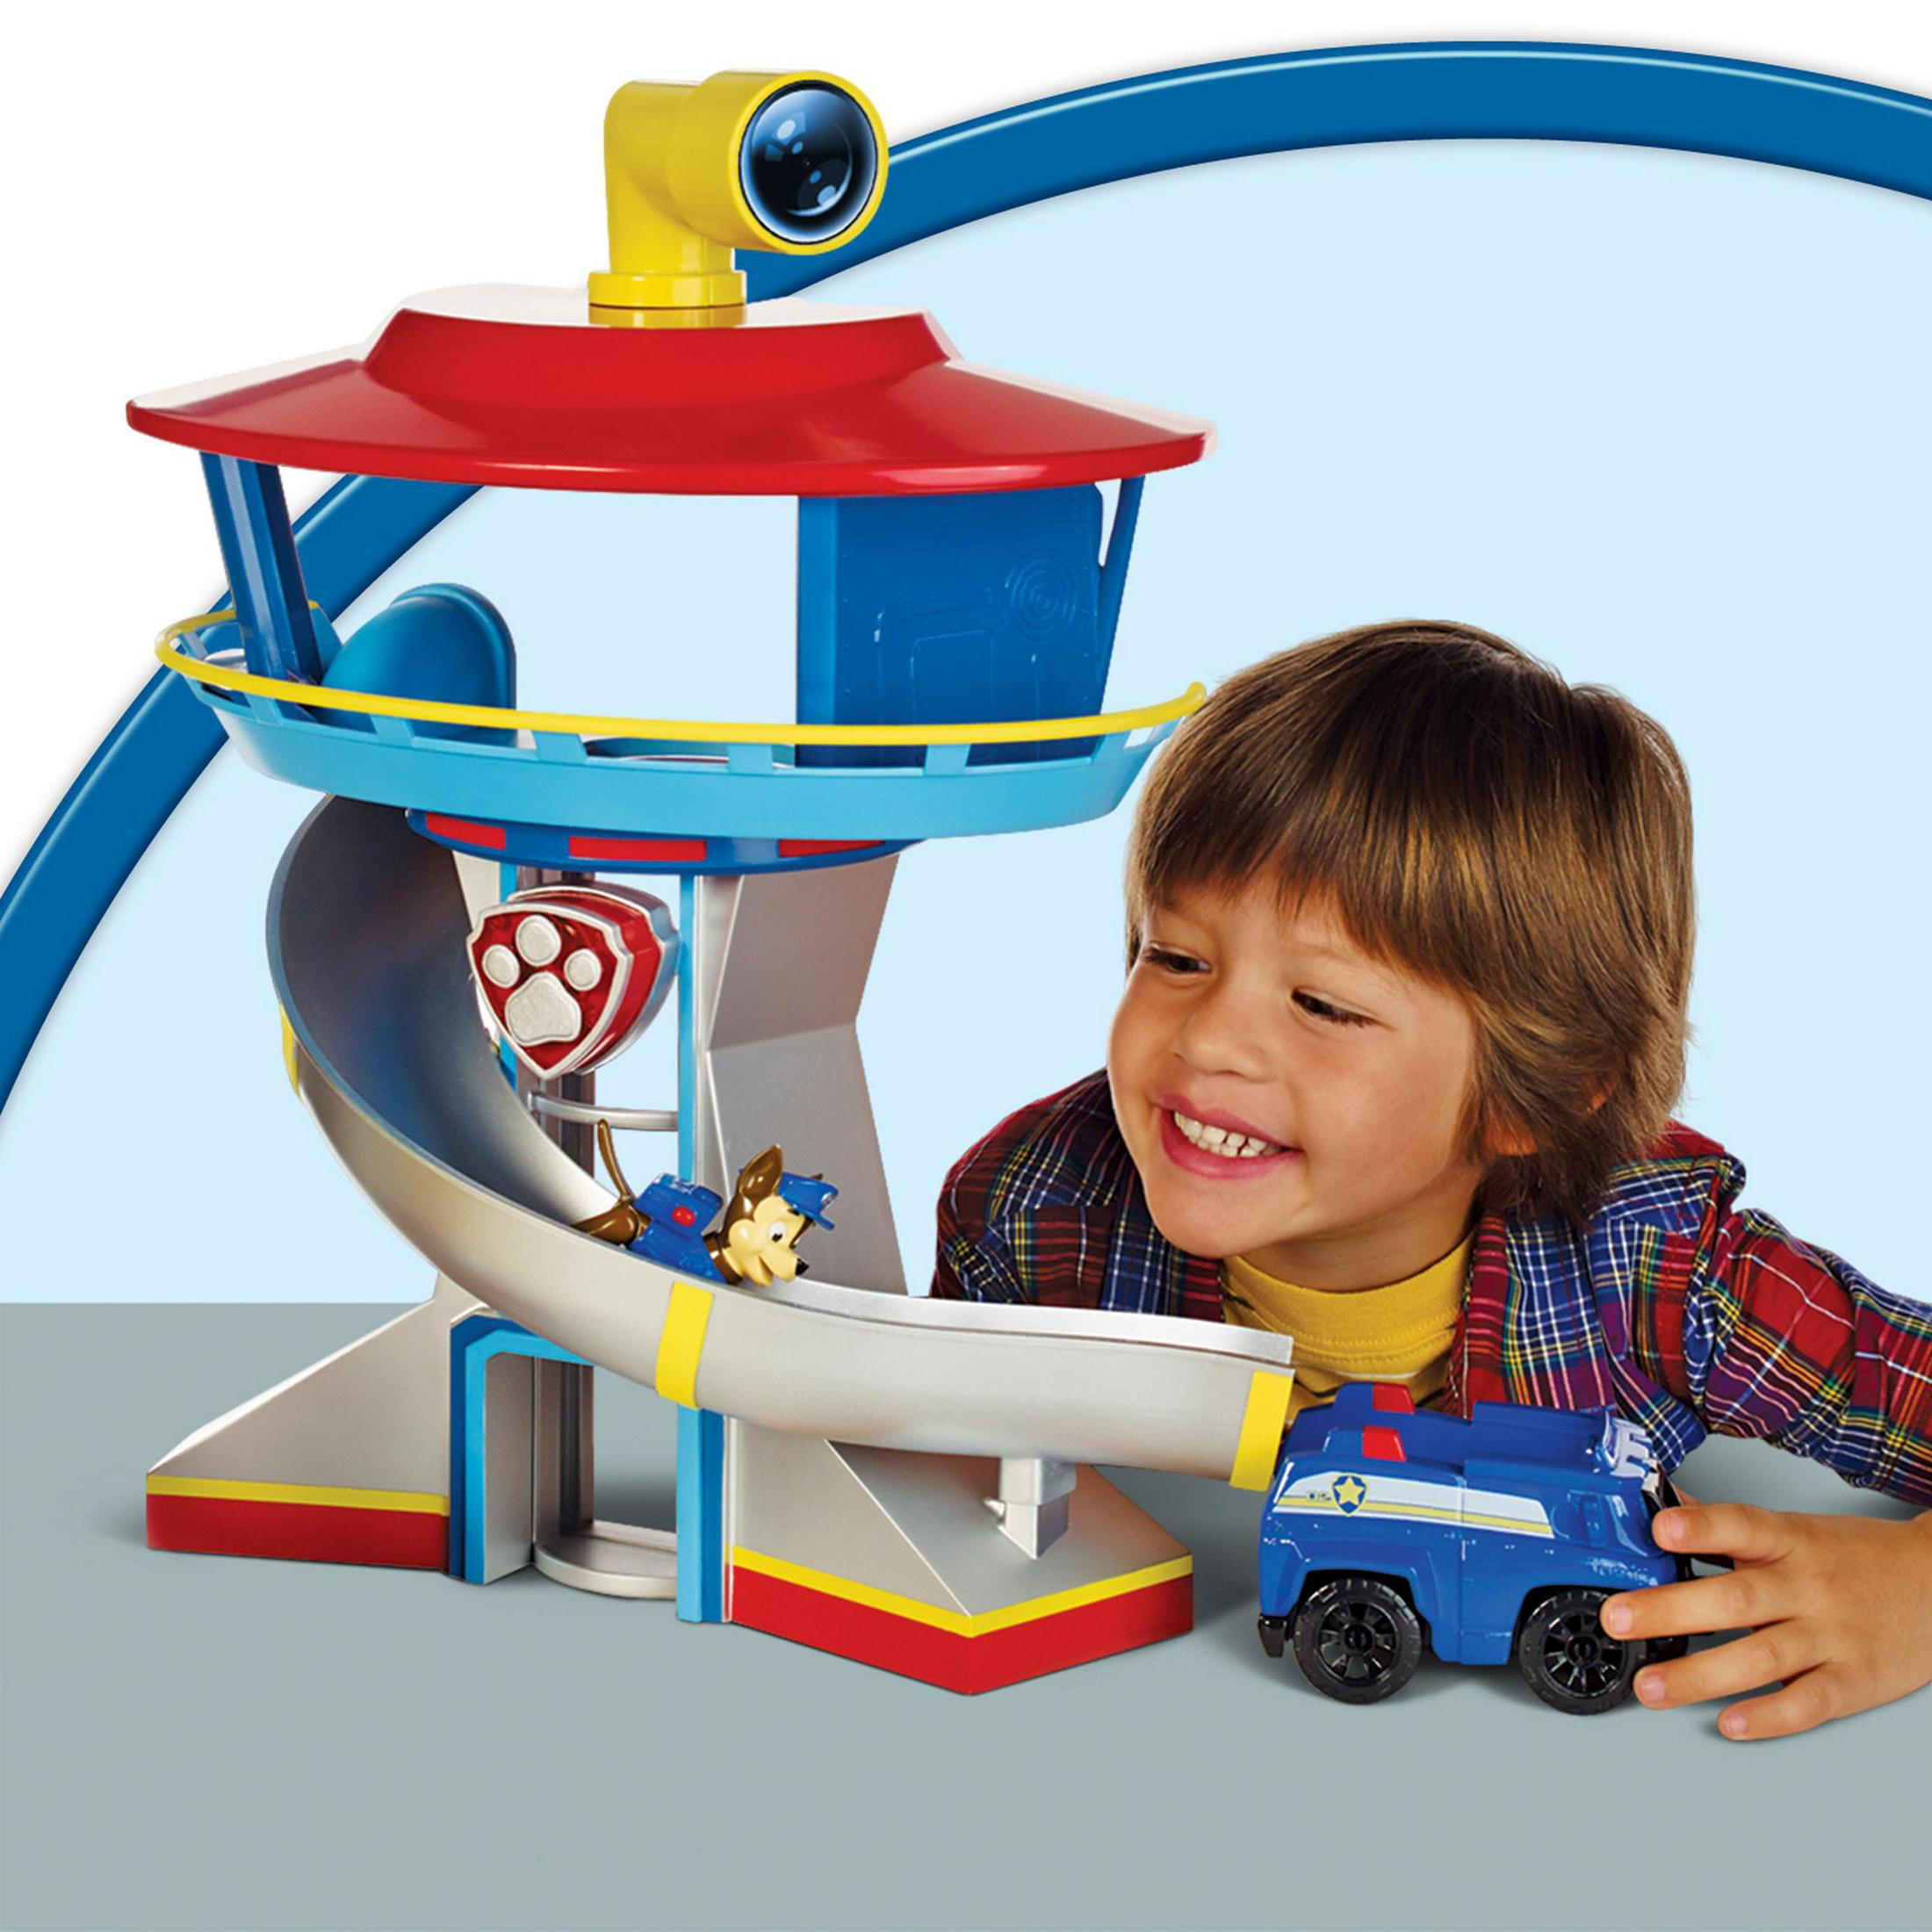 SPIN MASTER 32794 PAW Mehrfarbig LOOKOUT (HEADQUARTER) PLAYSET Spielset TOWER